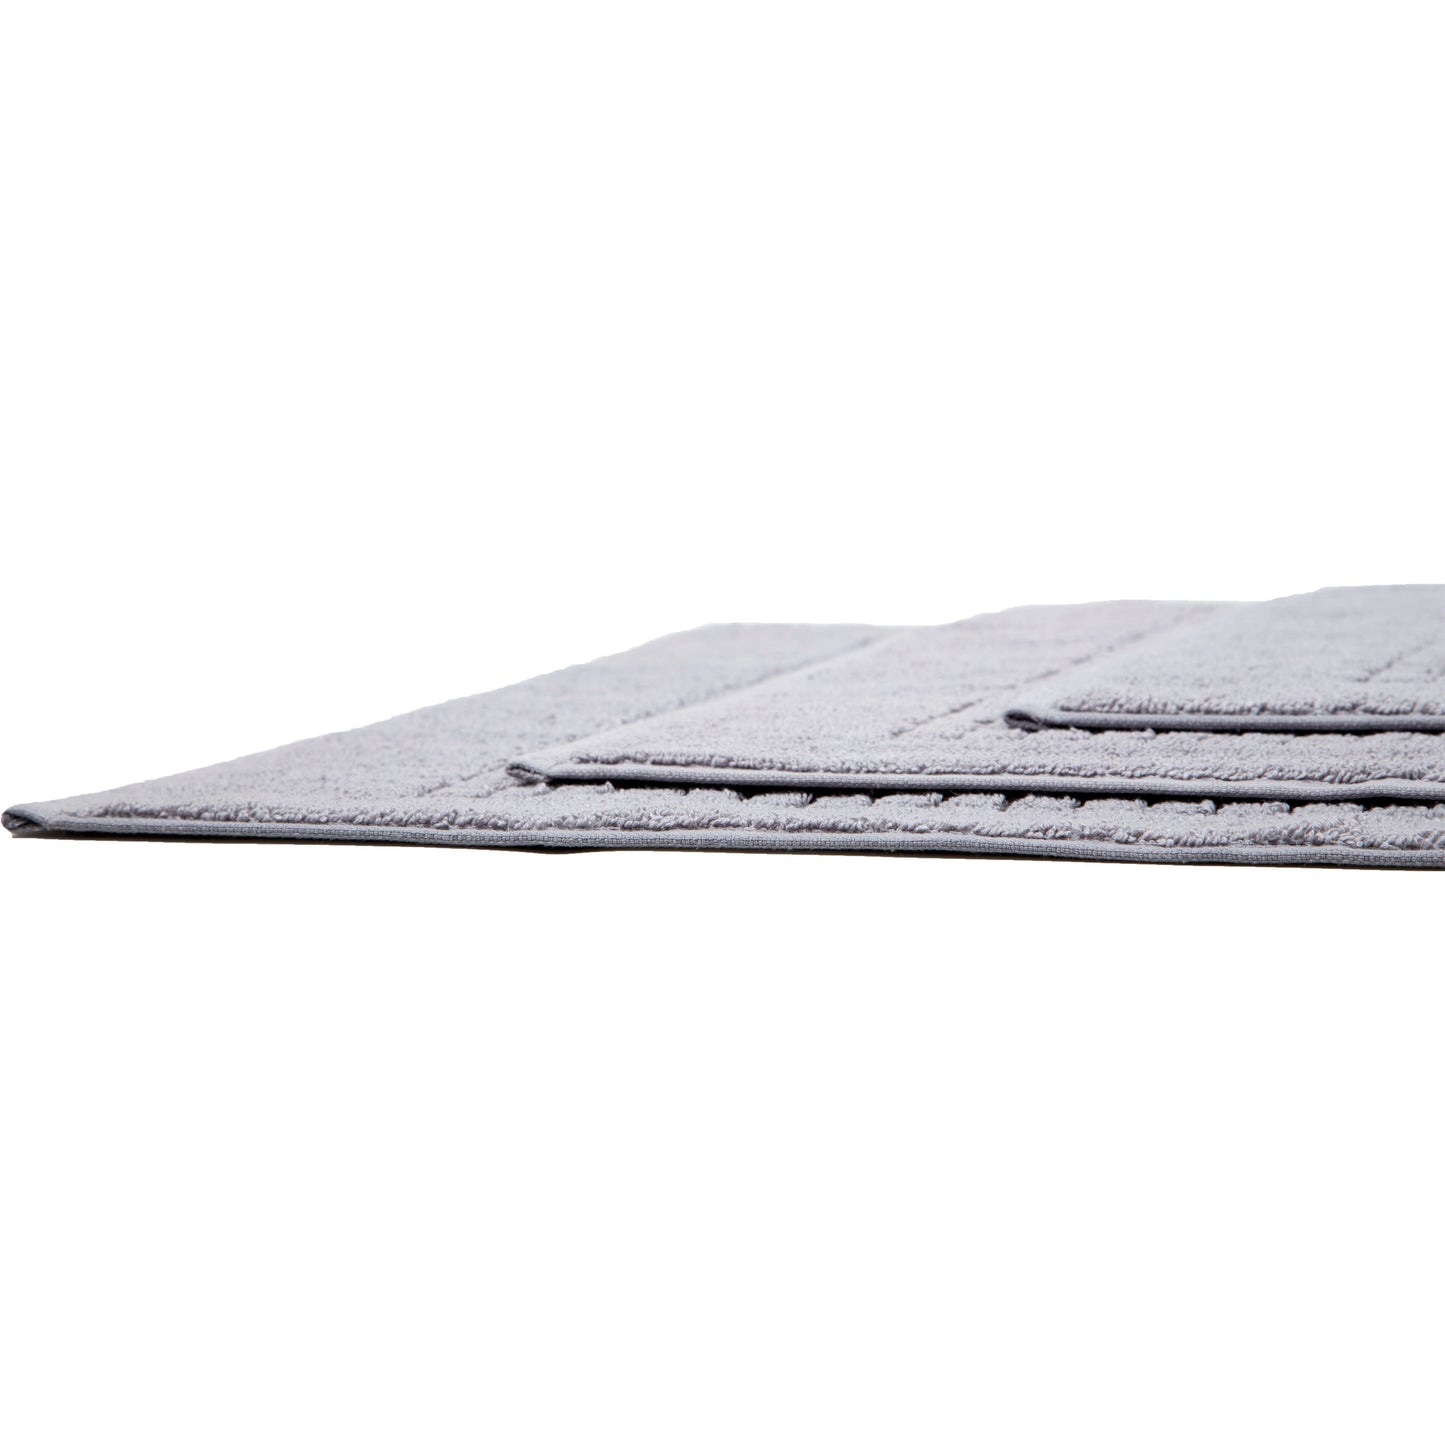 Turkish Home Cotton Bath Mat Set of 2, Gray, Washable Reversible, 100% Cotton 18 X 34 Inches